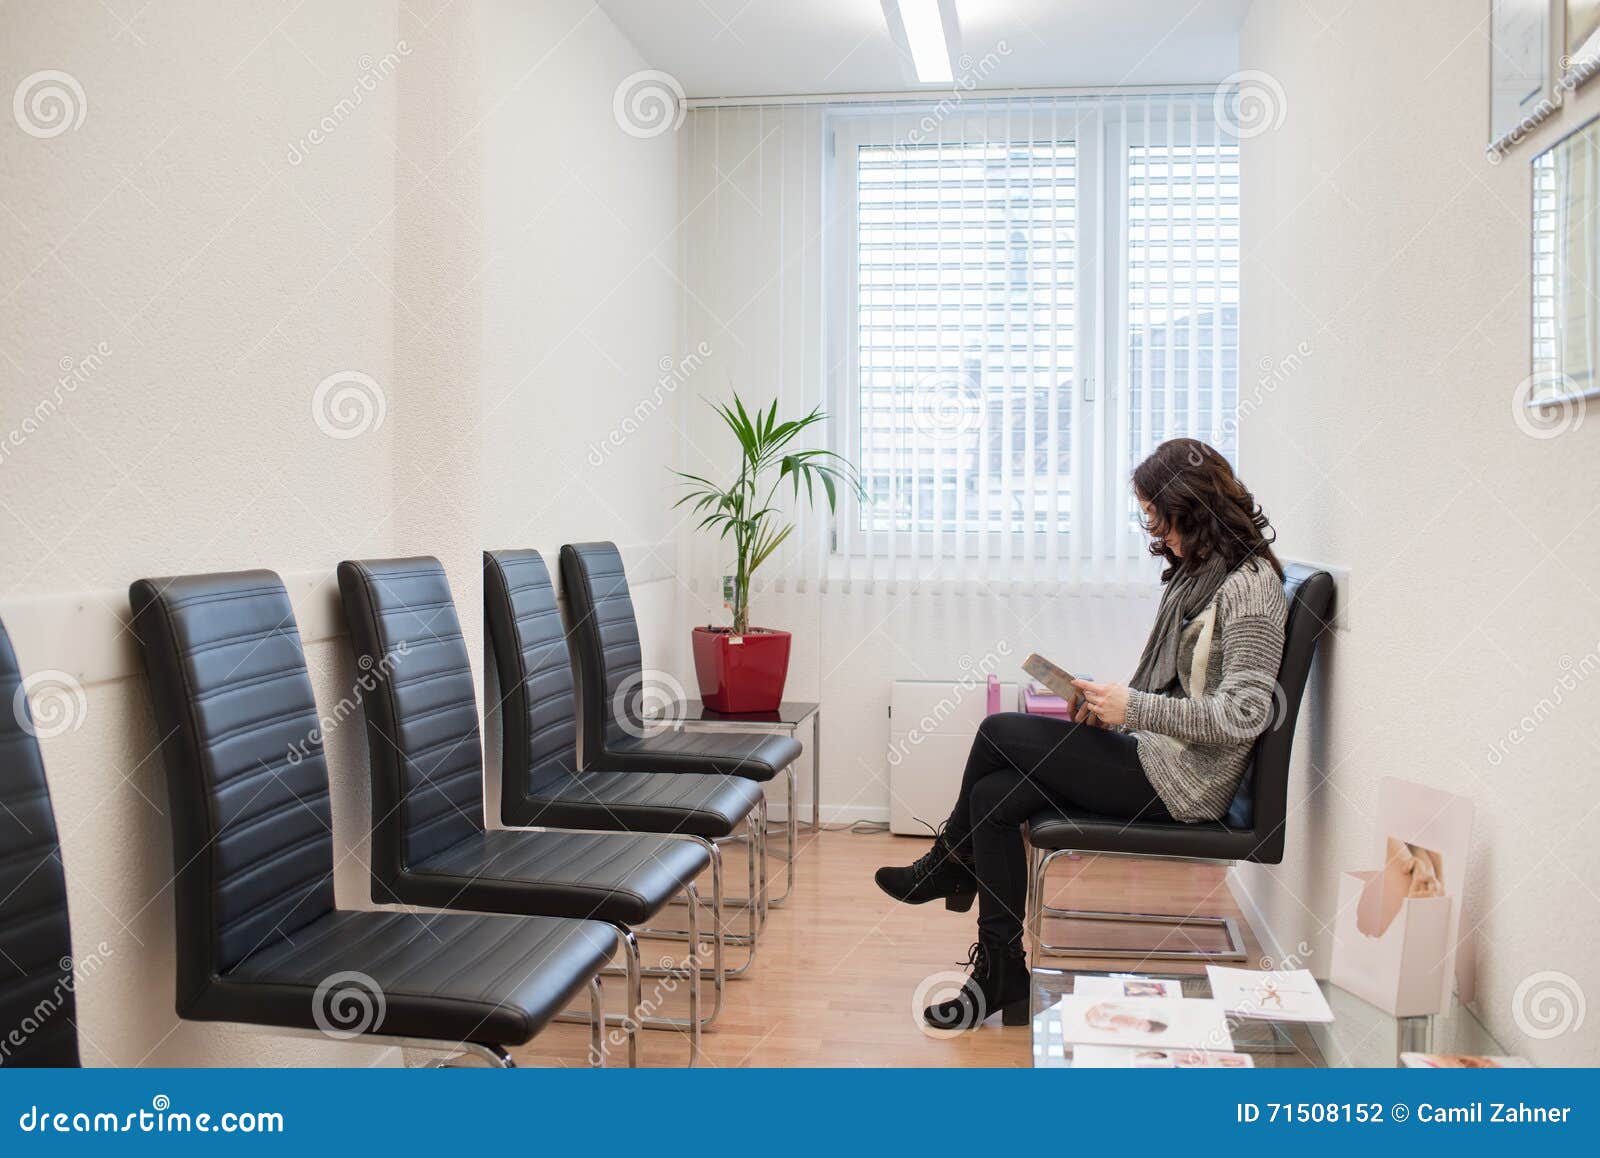 patient reading a magazine in the doctorÃ¢â¬â¢s waiting room